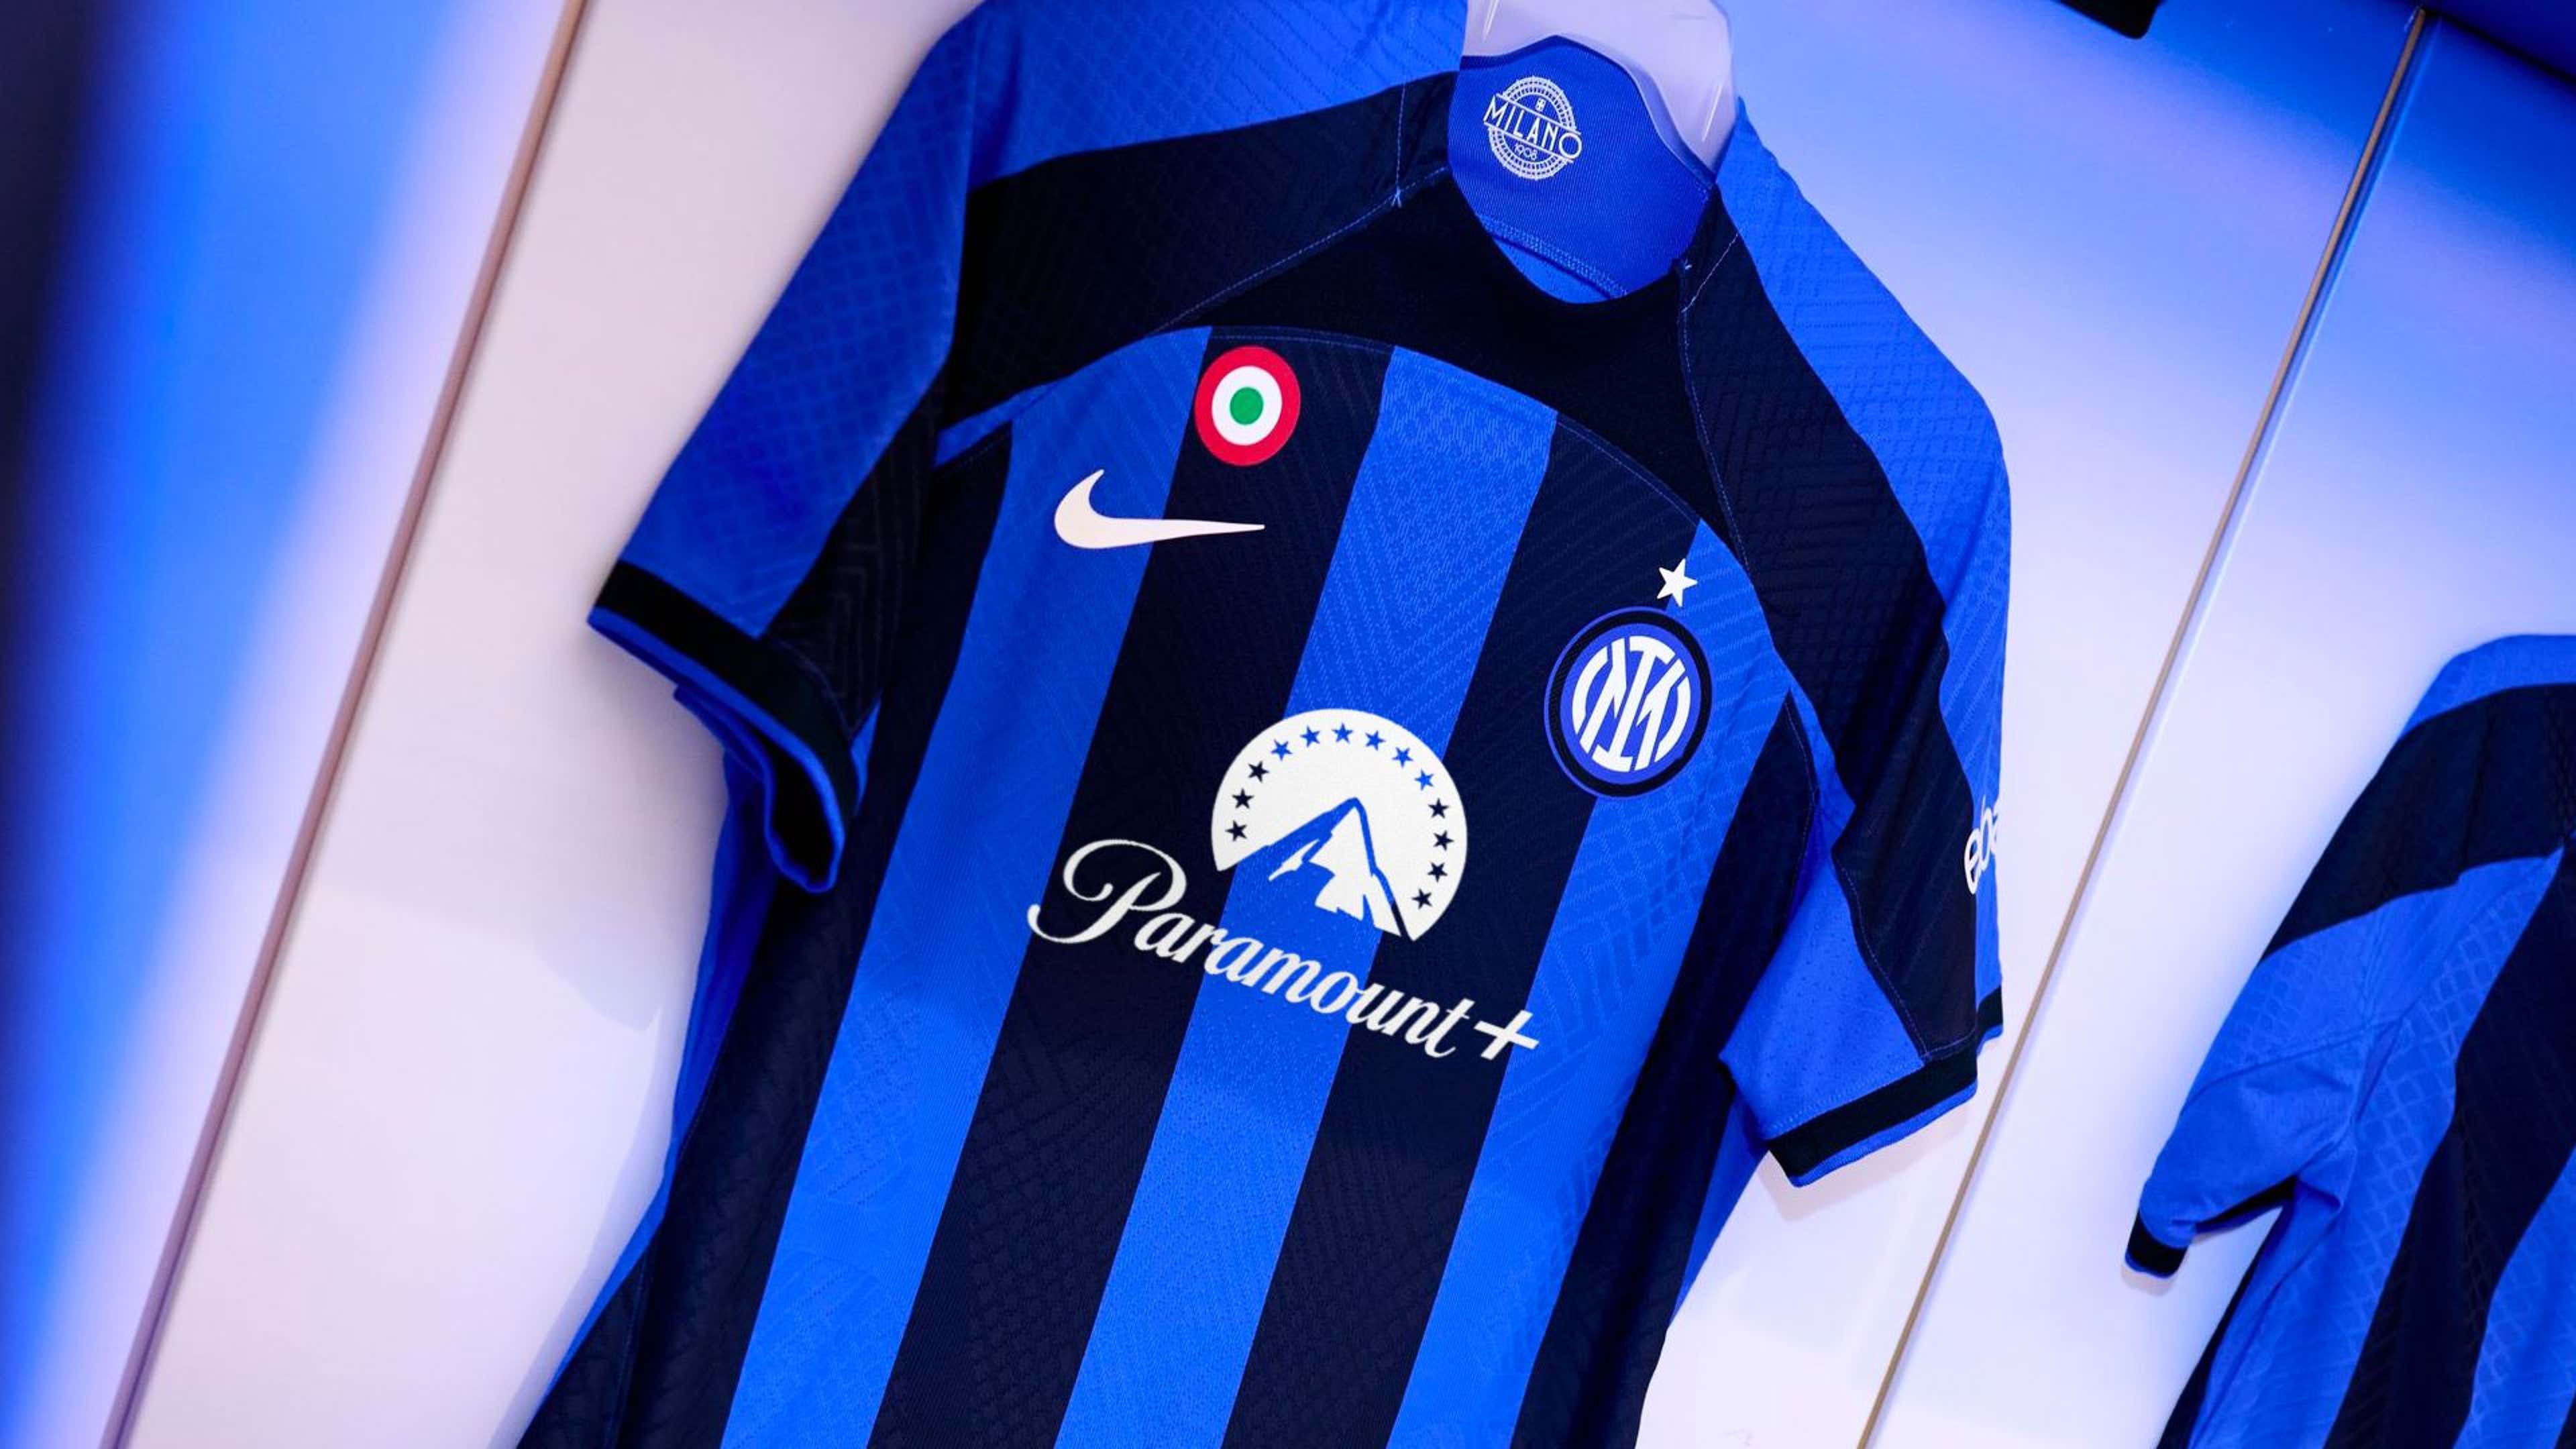 Explained: Why Inter will have a new shirt sponsor for the Champions League  final against Manchester City as Paramount+ replaces DigitalBits